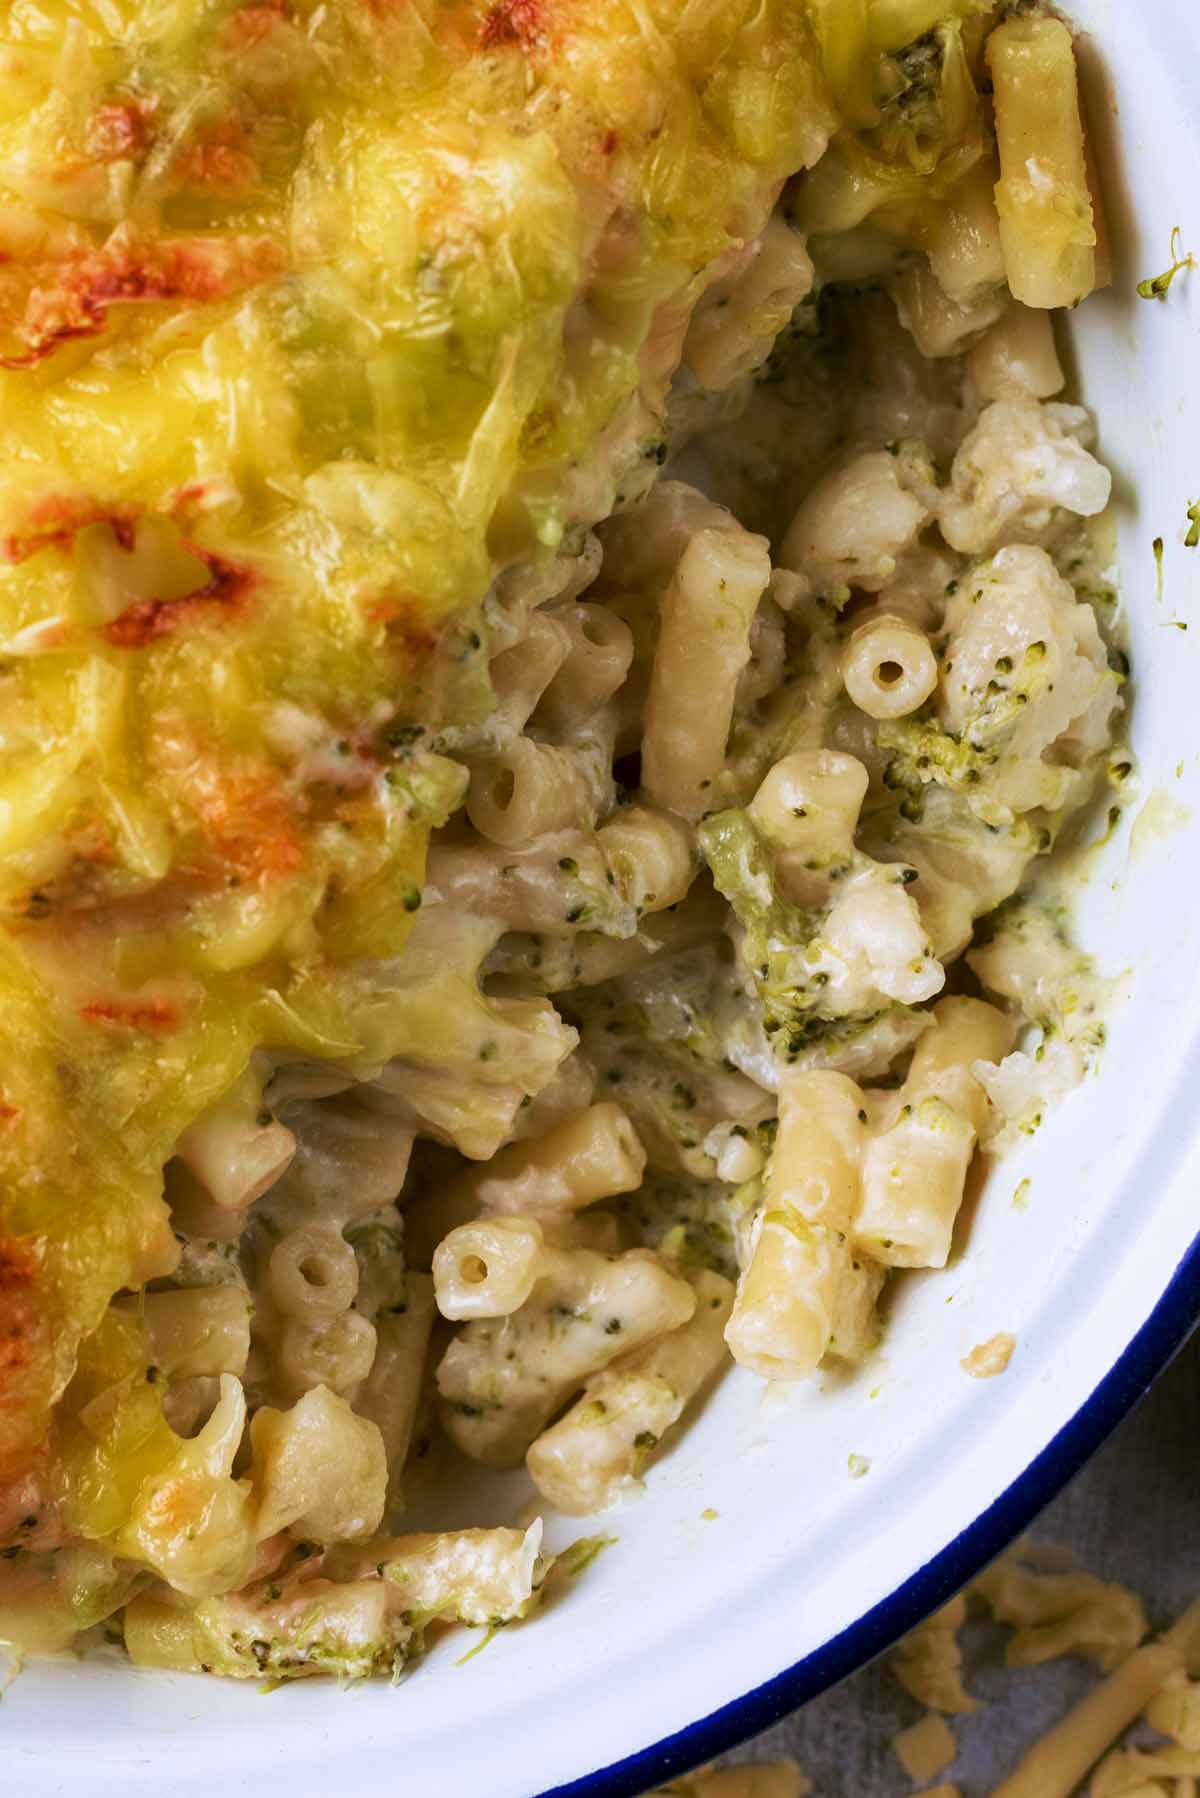 Cooked macaroni in a cheese sauce with finely chopped broccoli in it.